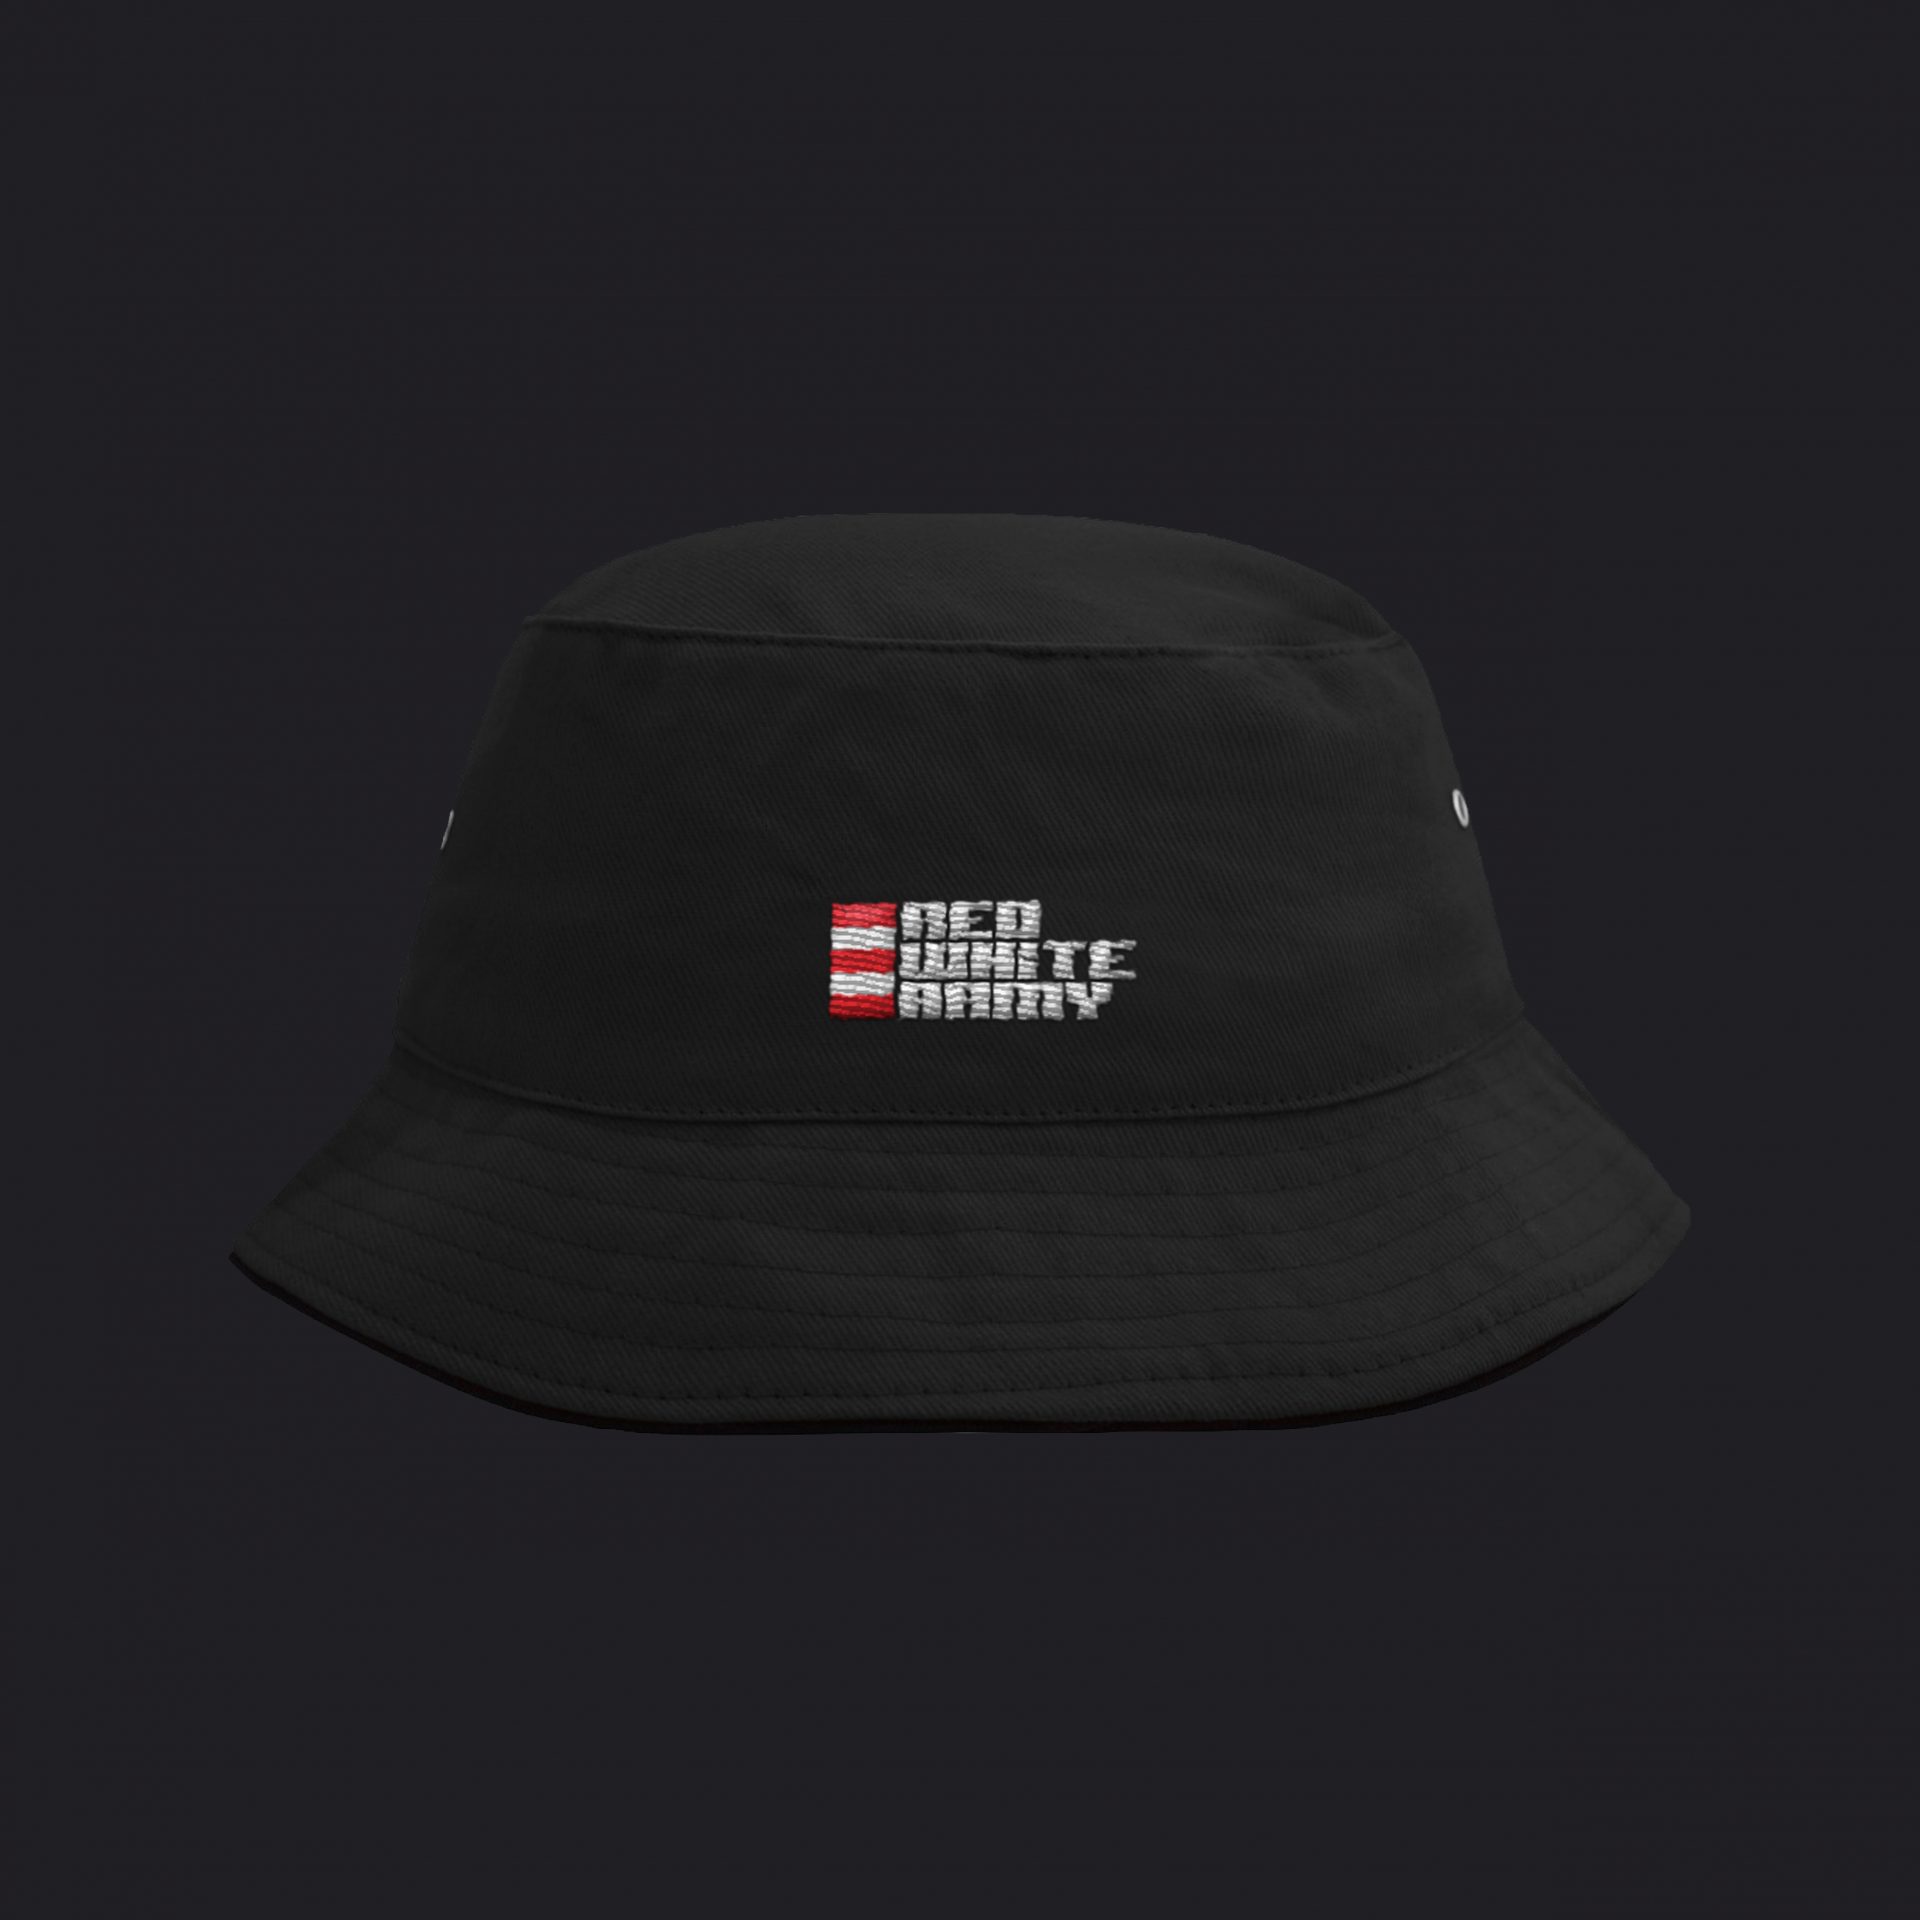 Bucket hat - Red White Army